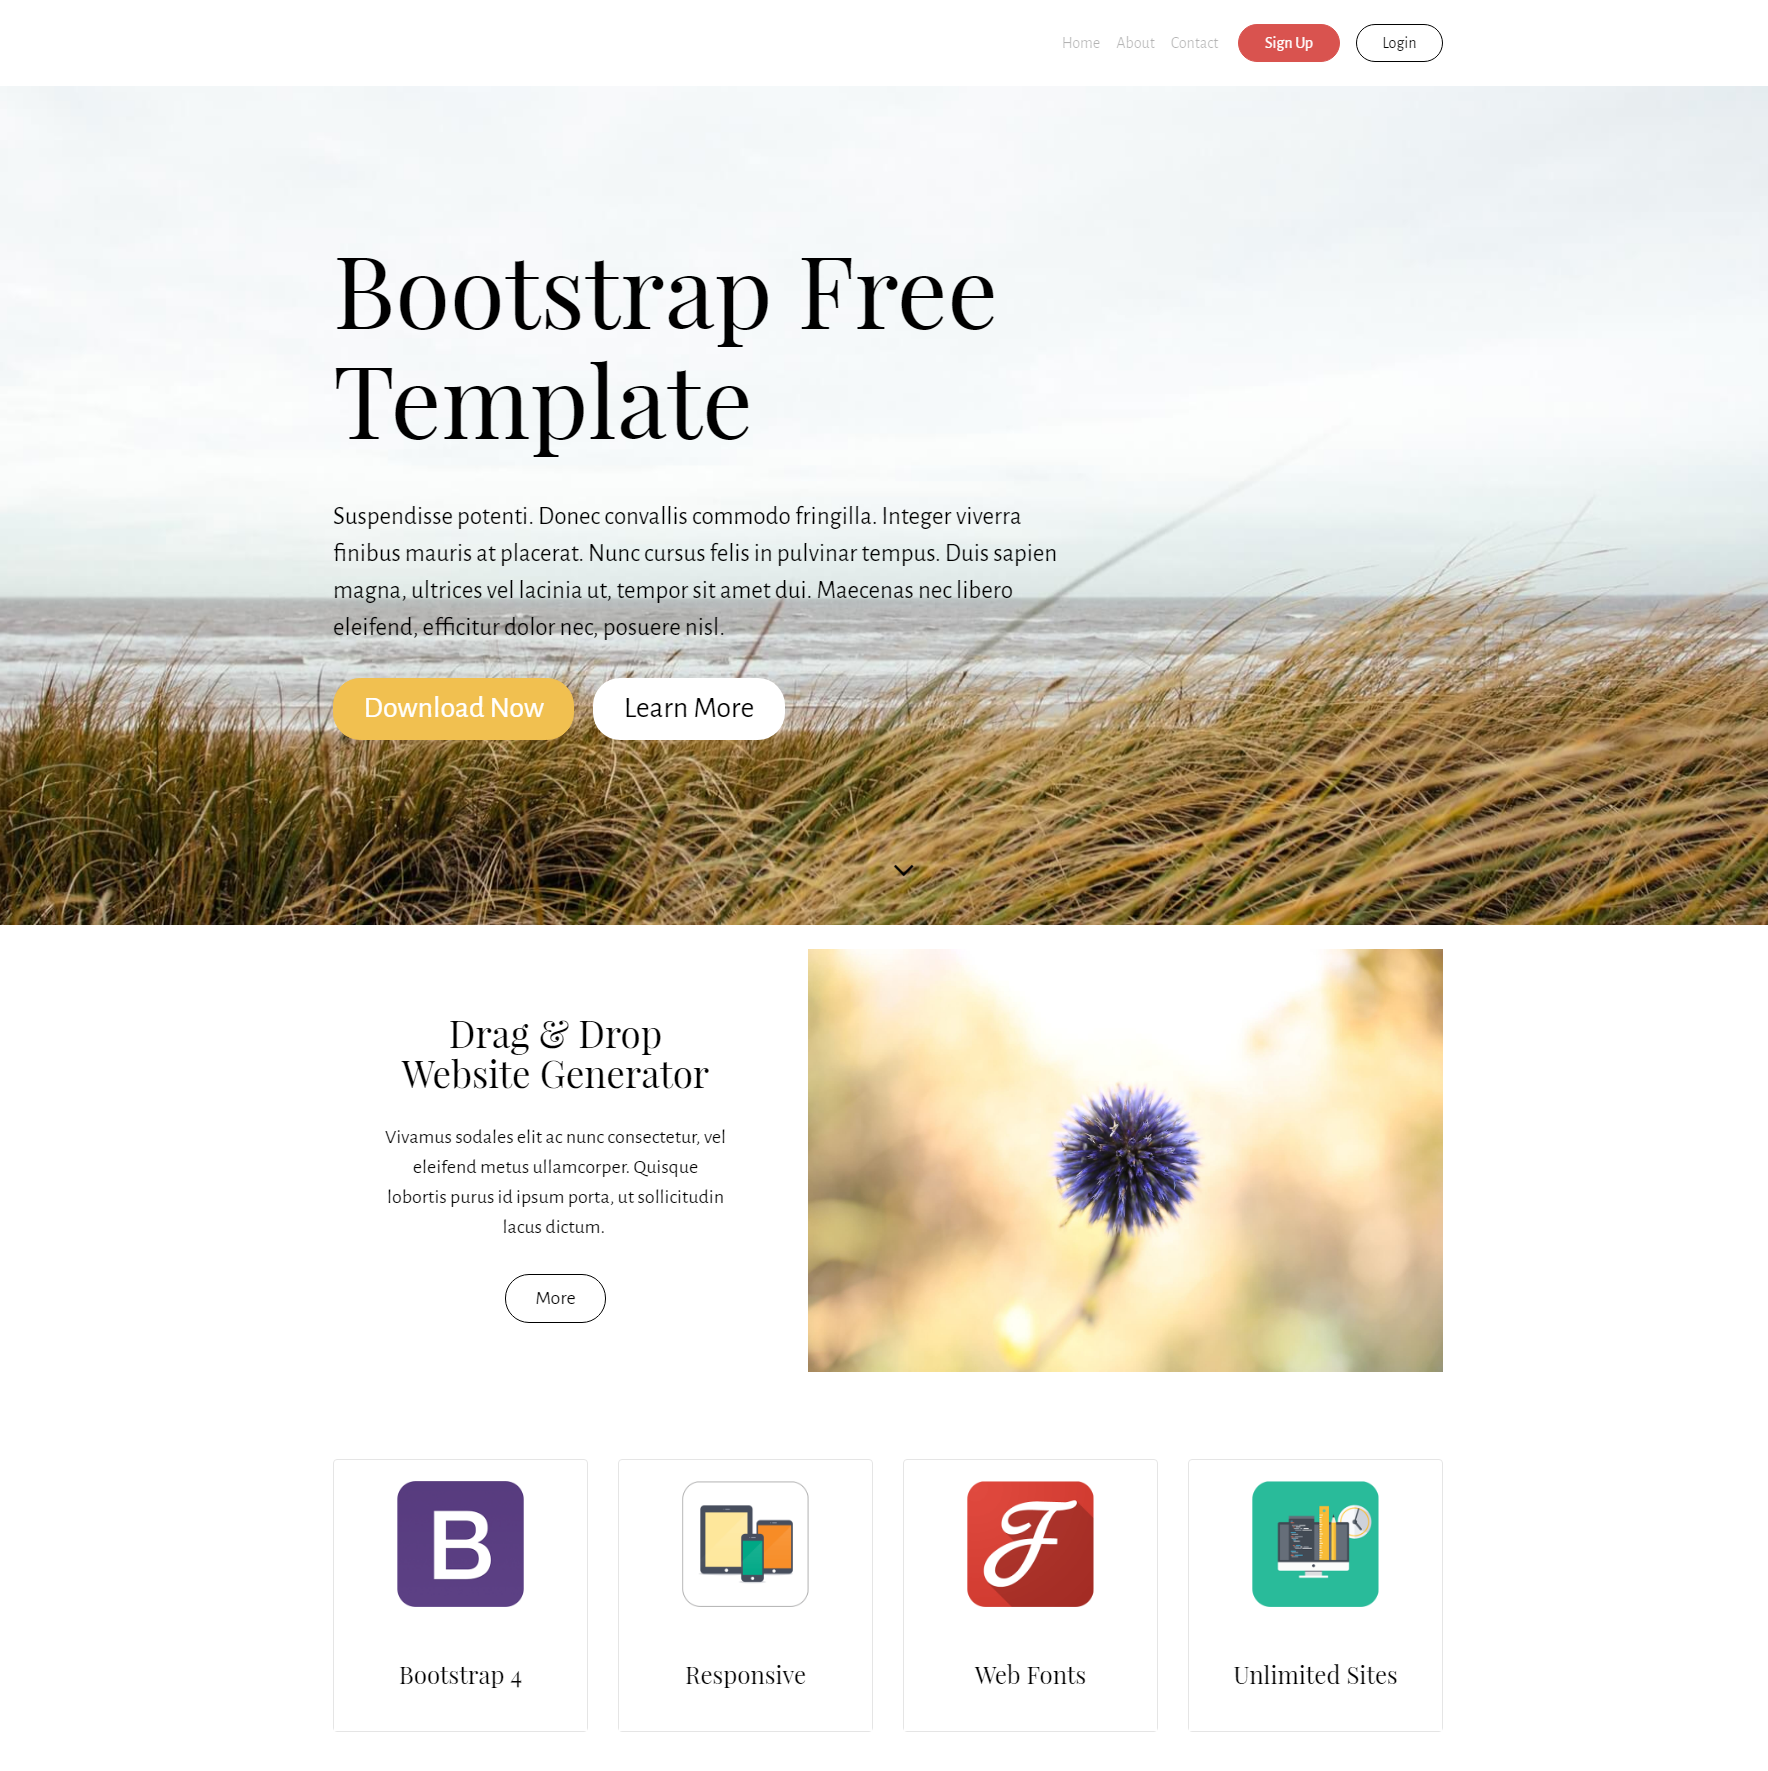 Free Download Bootstrap PurityM Templates